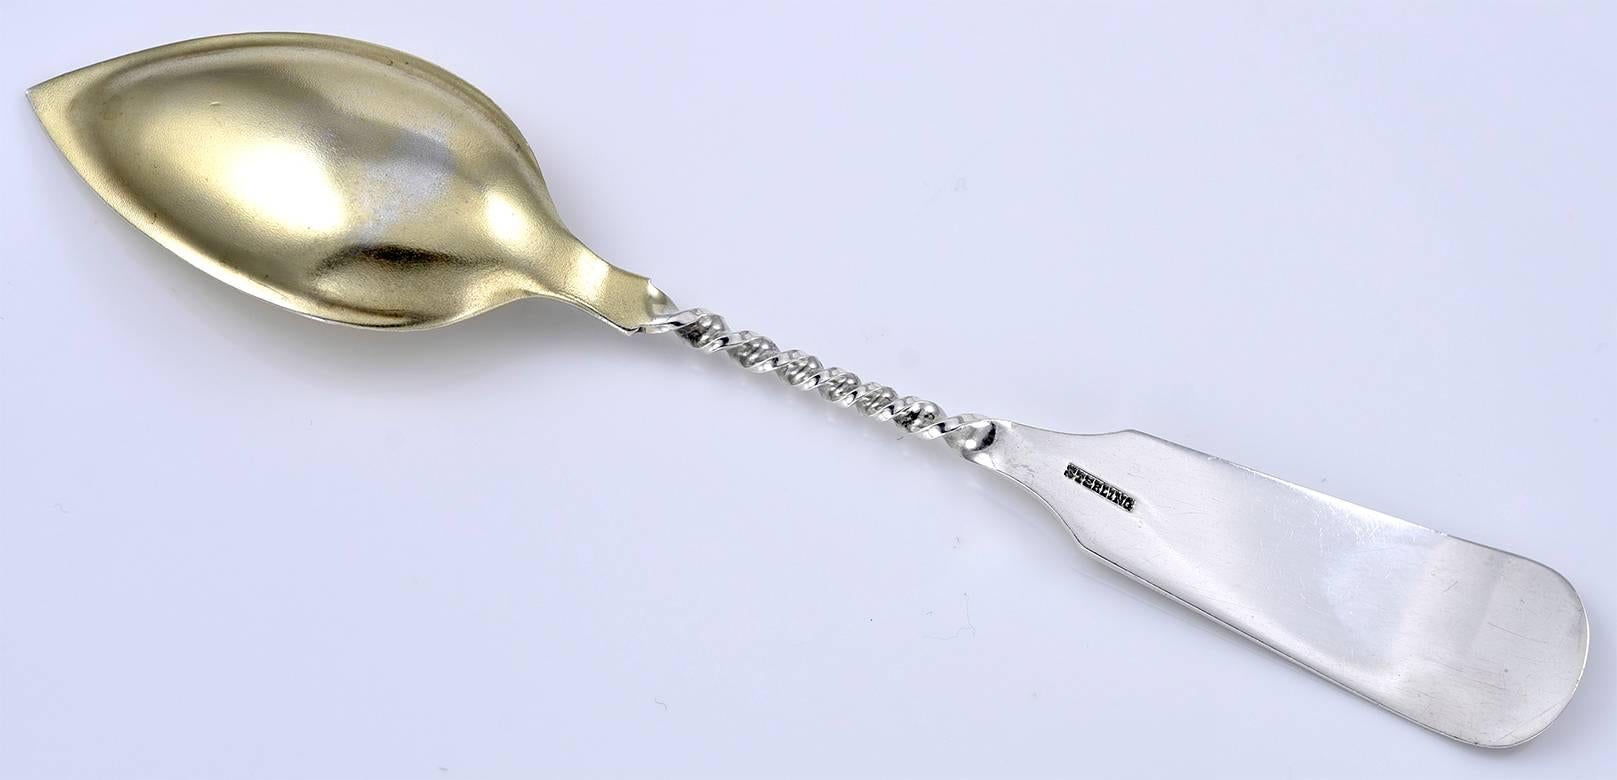 Antique sterling silver dessert spoon.  There is an engraved image of a cathedral, with applied letters that spell out 